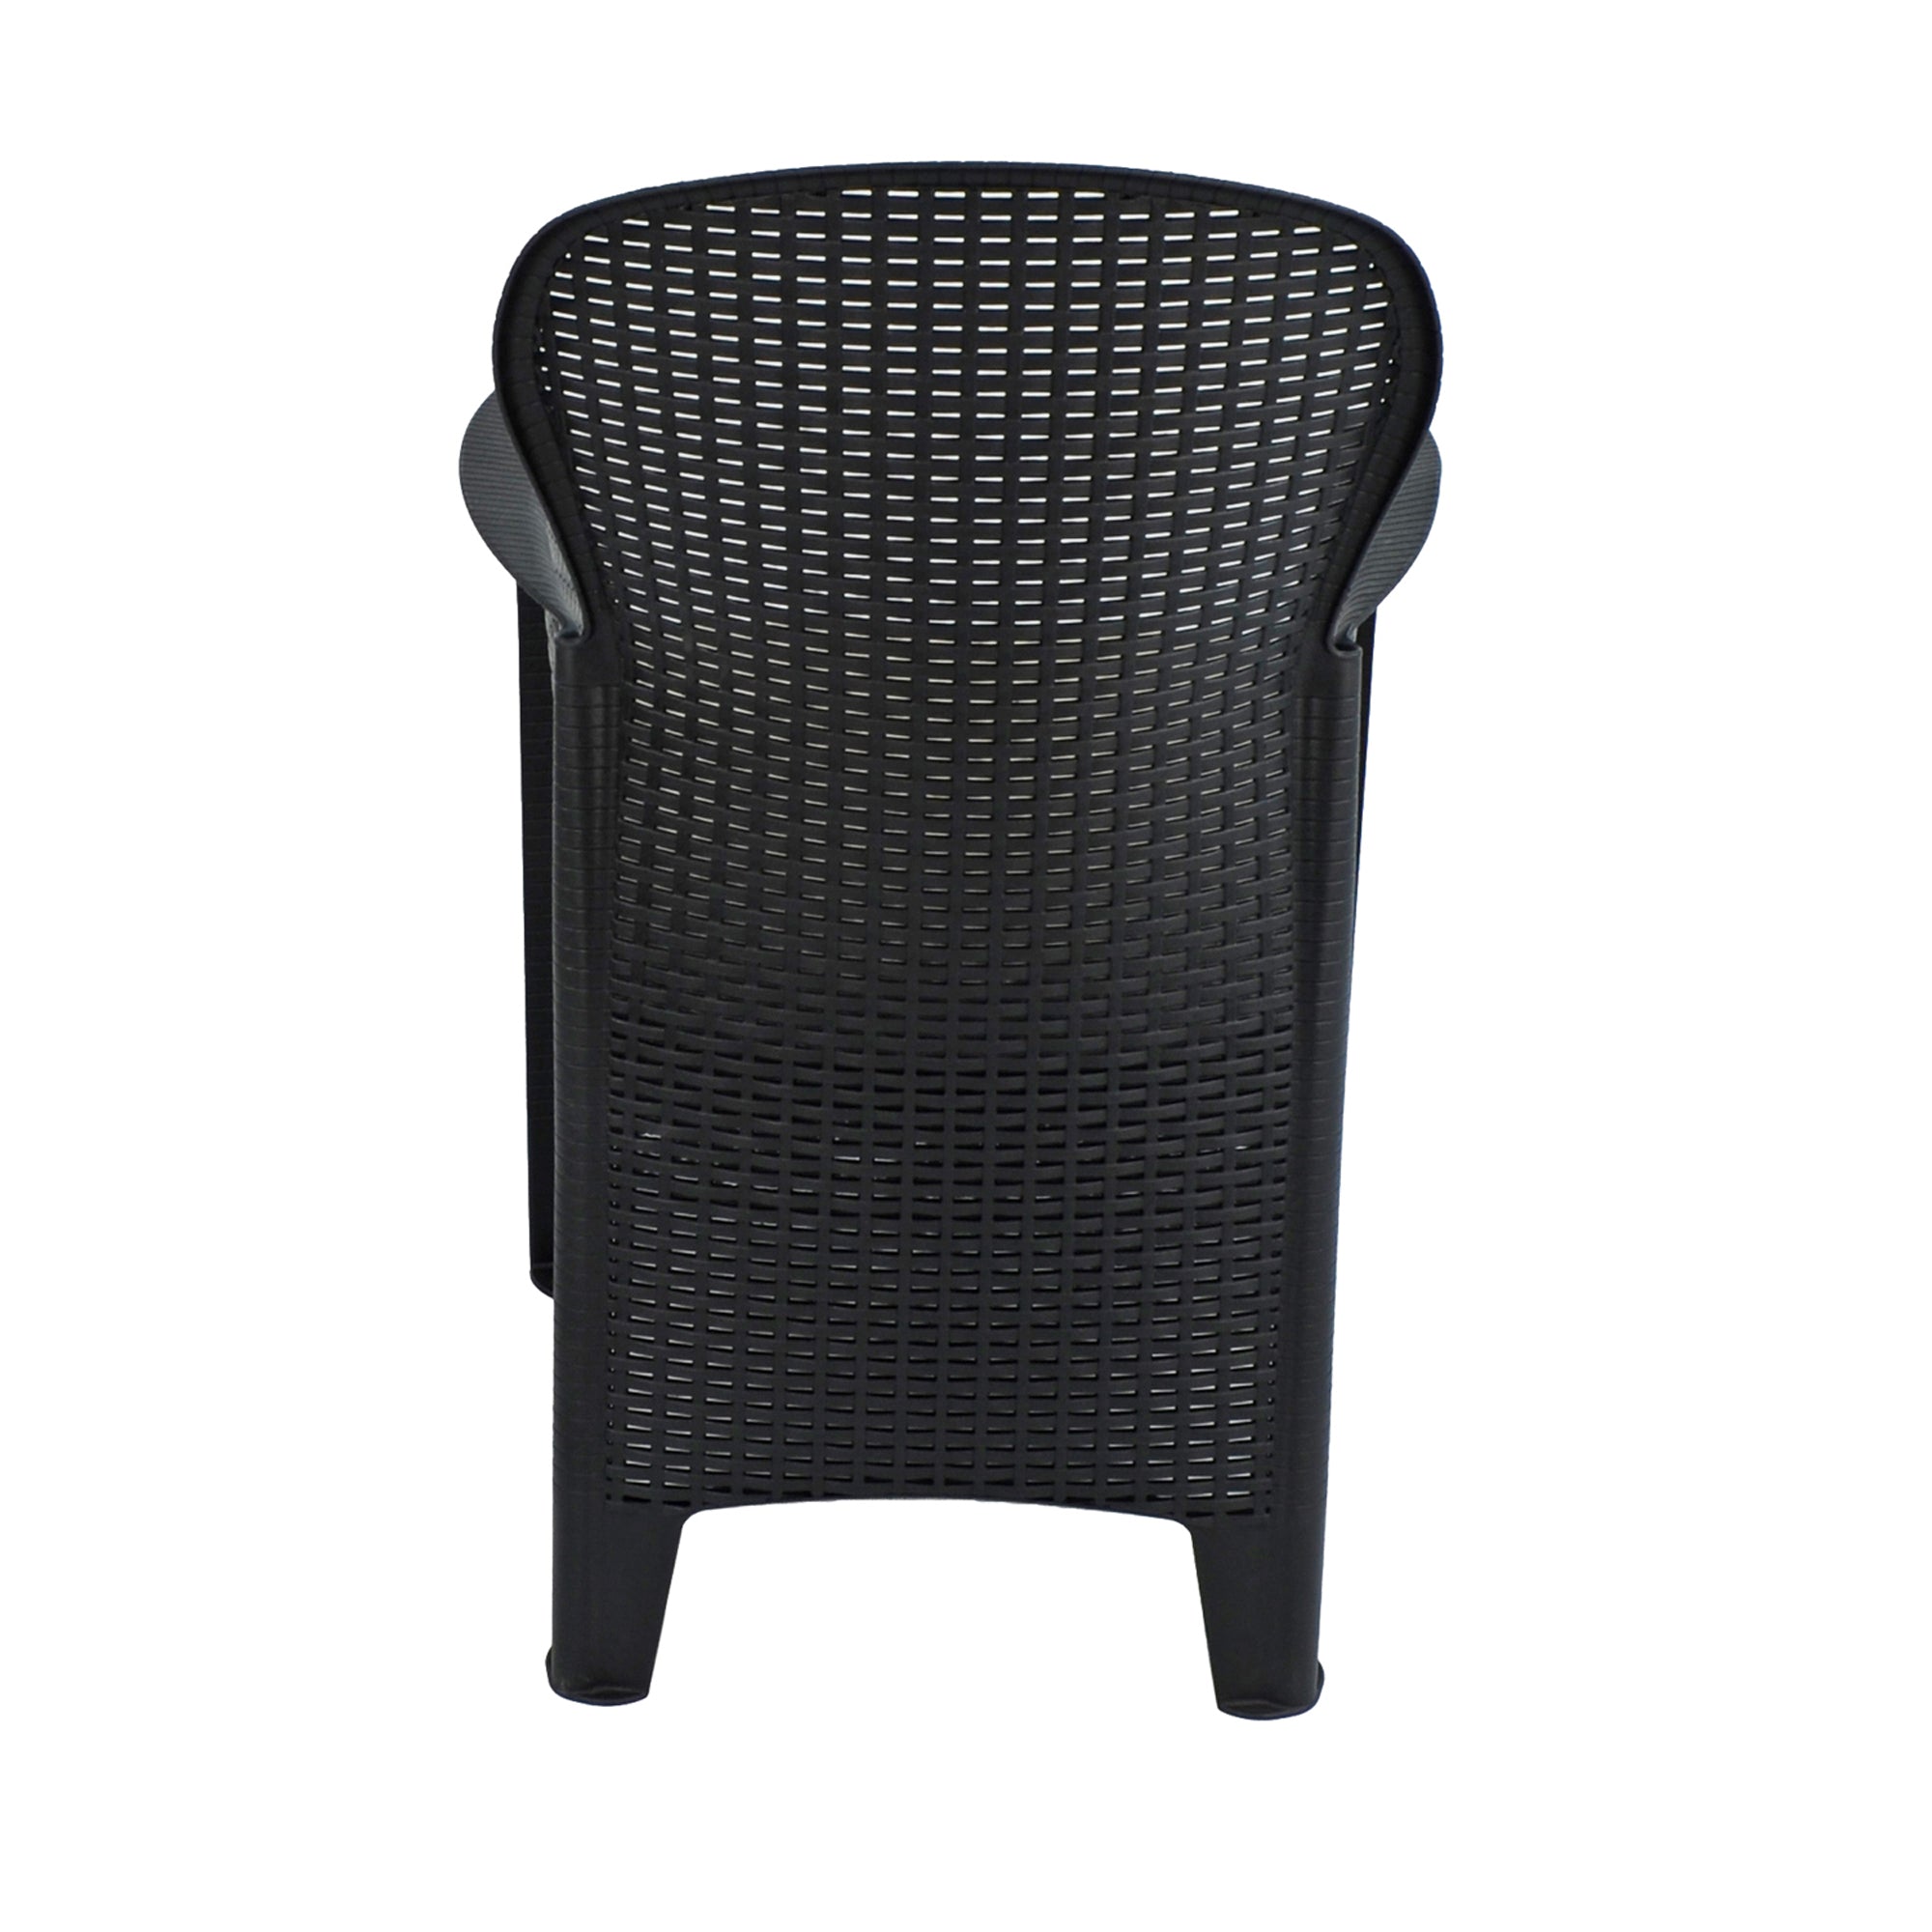 Trabella Sicily Garden Chair Anthracite (Pack of 2) Chairs Trabella   